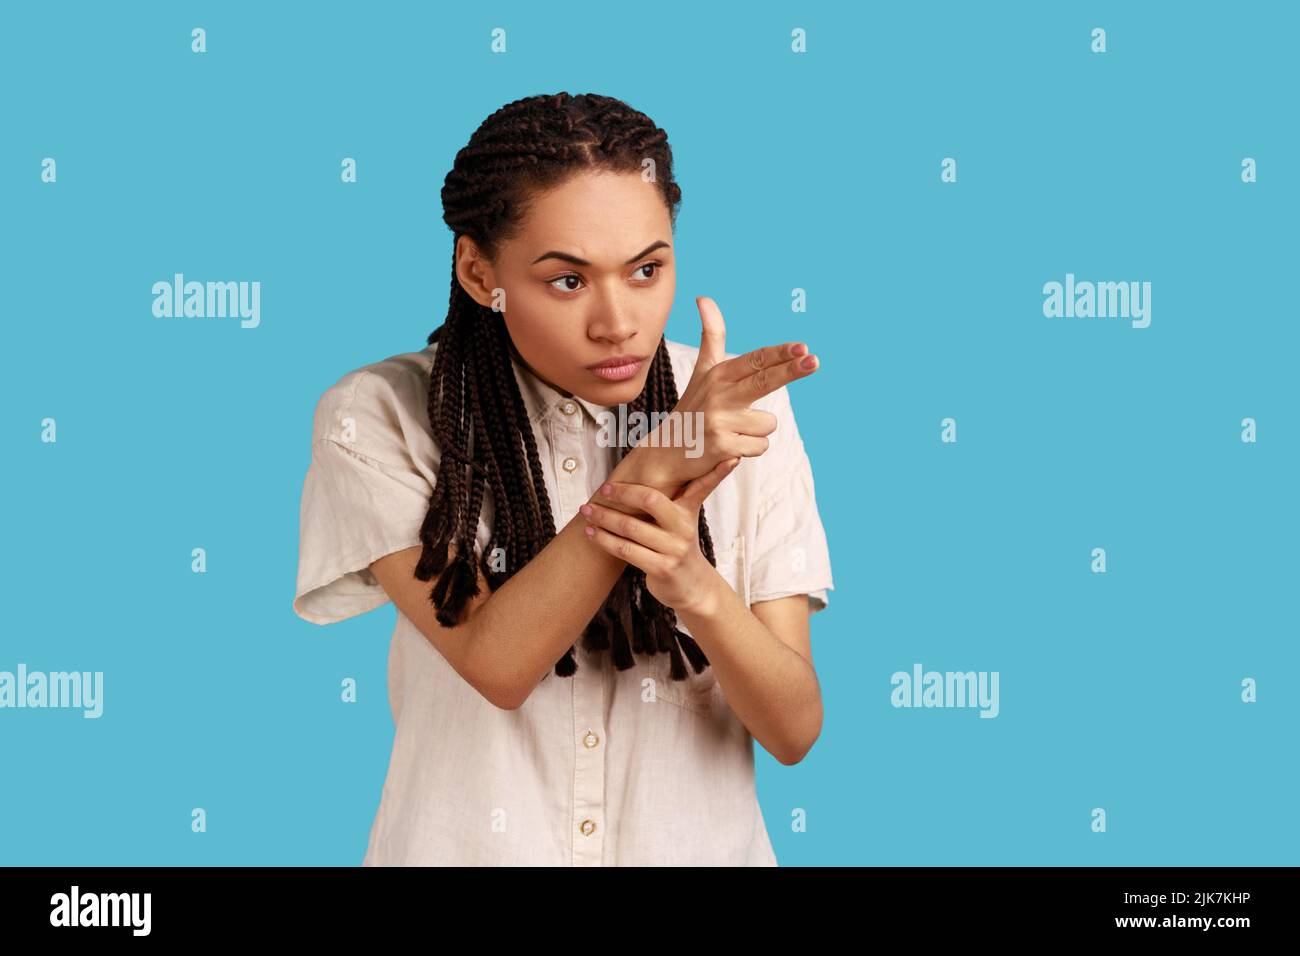 Portrait of woman with black dreadlocks pointing finger gun, aiming and threatening to shoot with pistol hand gesture, wearing white shirt. Indoor studio shot isolated on blue background. Stock Photo